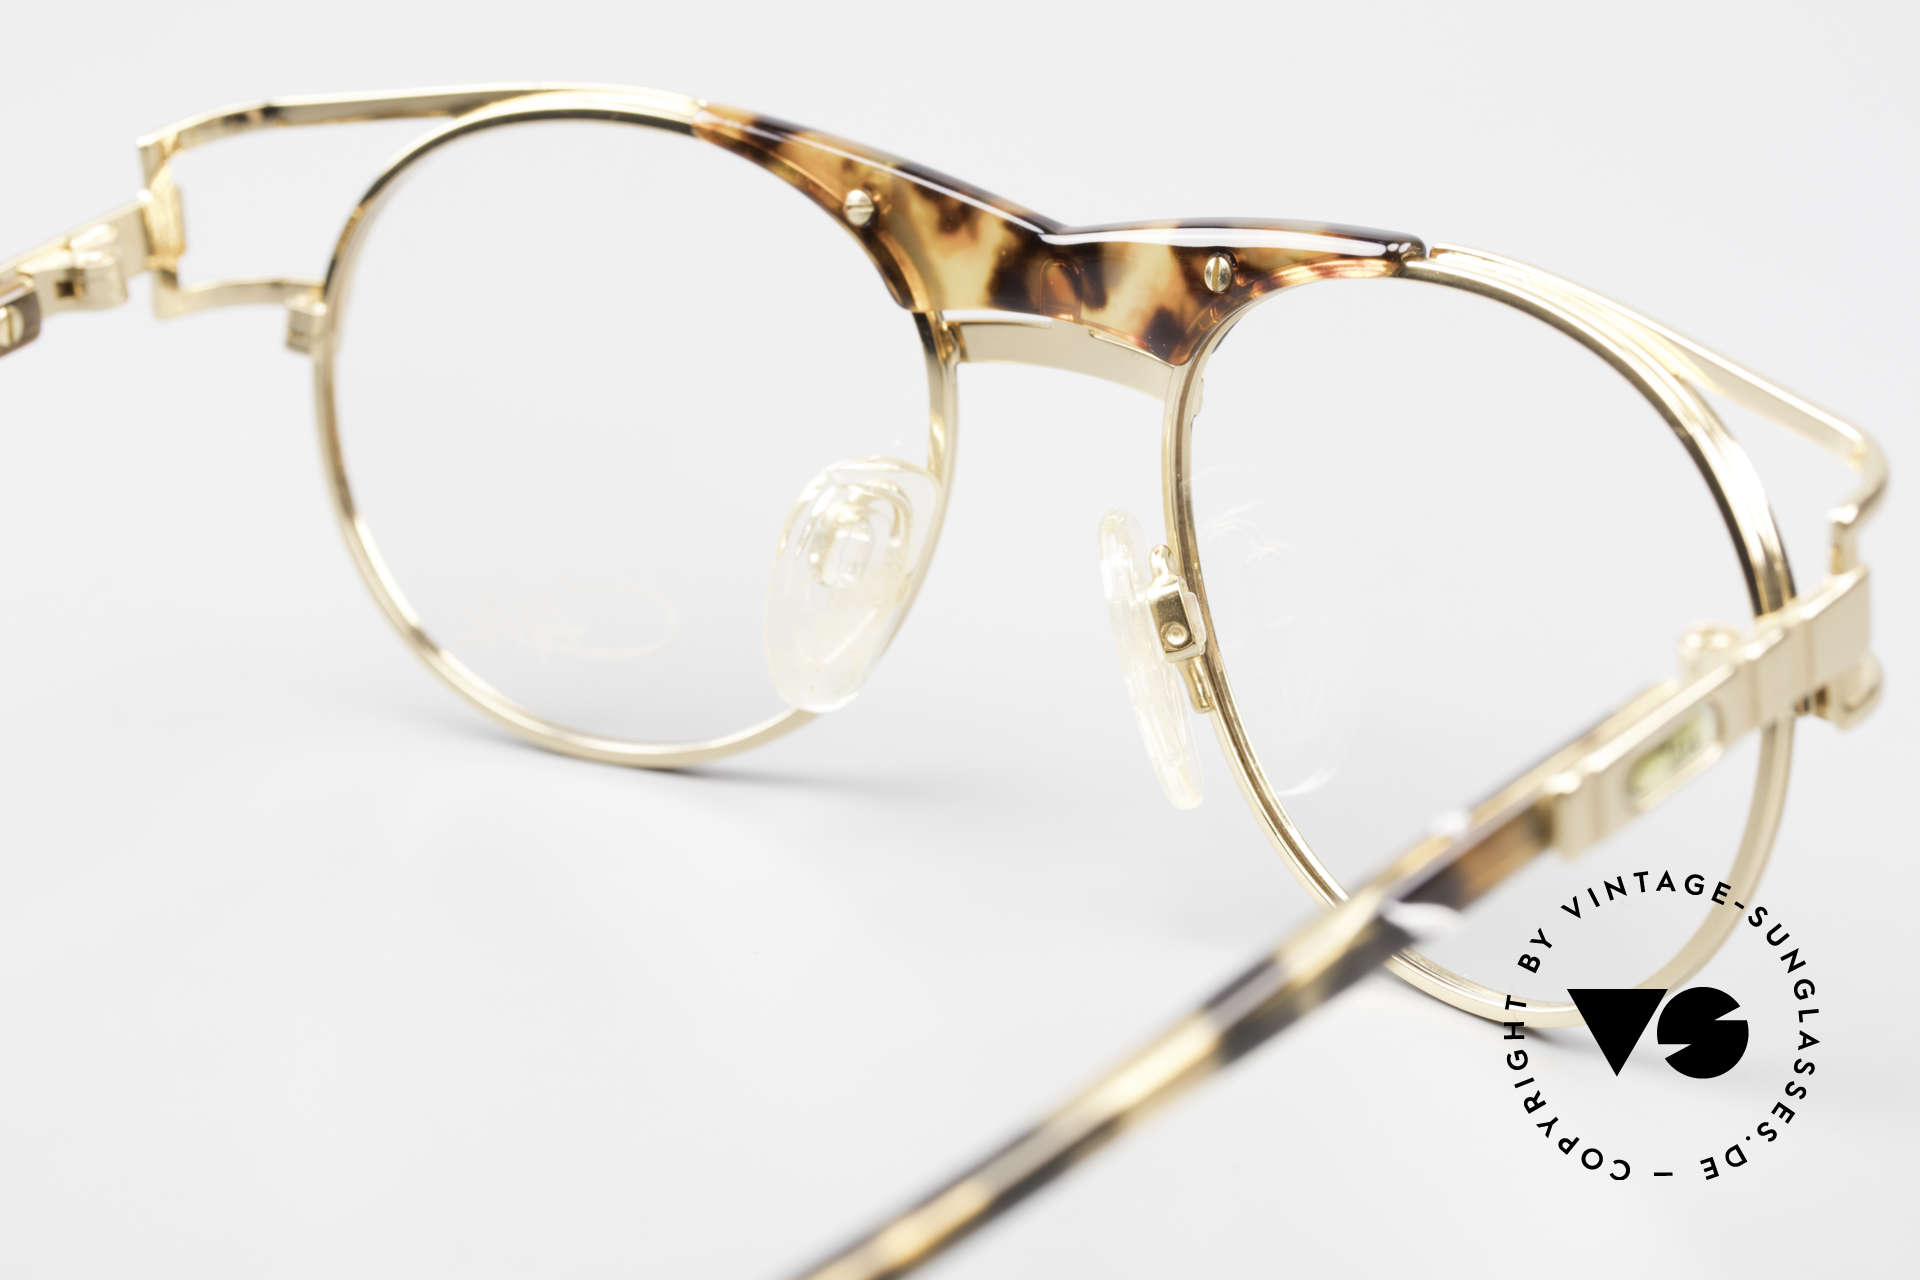 Cazal 244 Iconic 90's Vintage Eyeglasses, the orig. DEMO lenses can be replaced optionally, Made for Men and Women